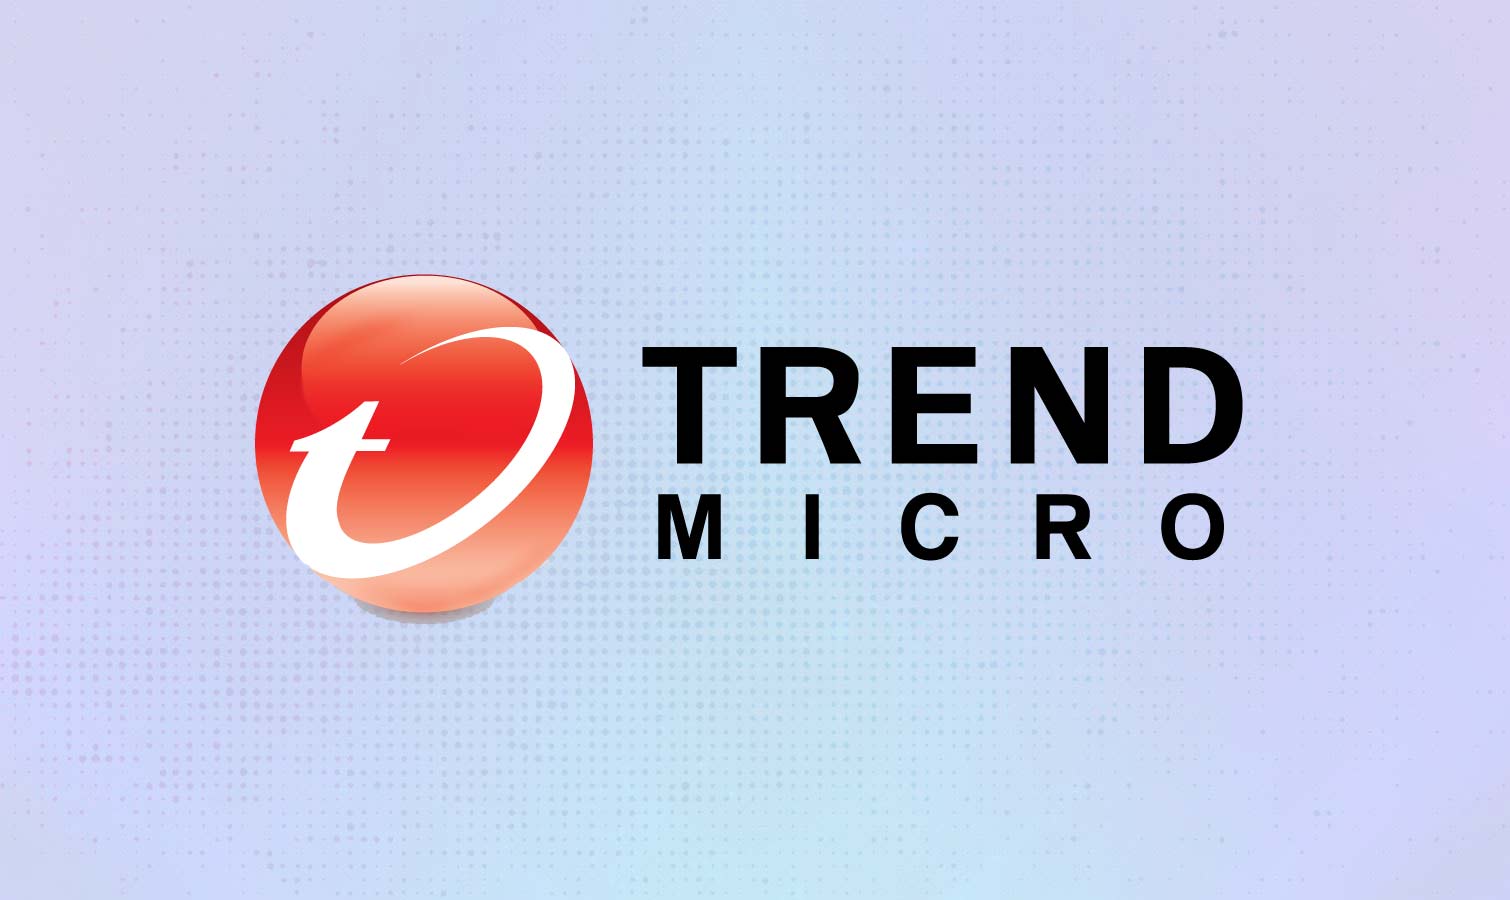 trend micro security for windows 10 in s mode